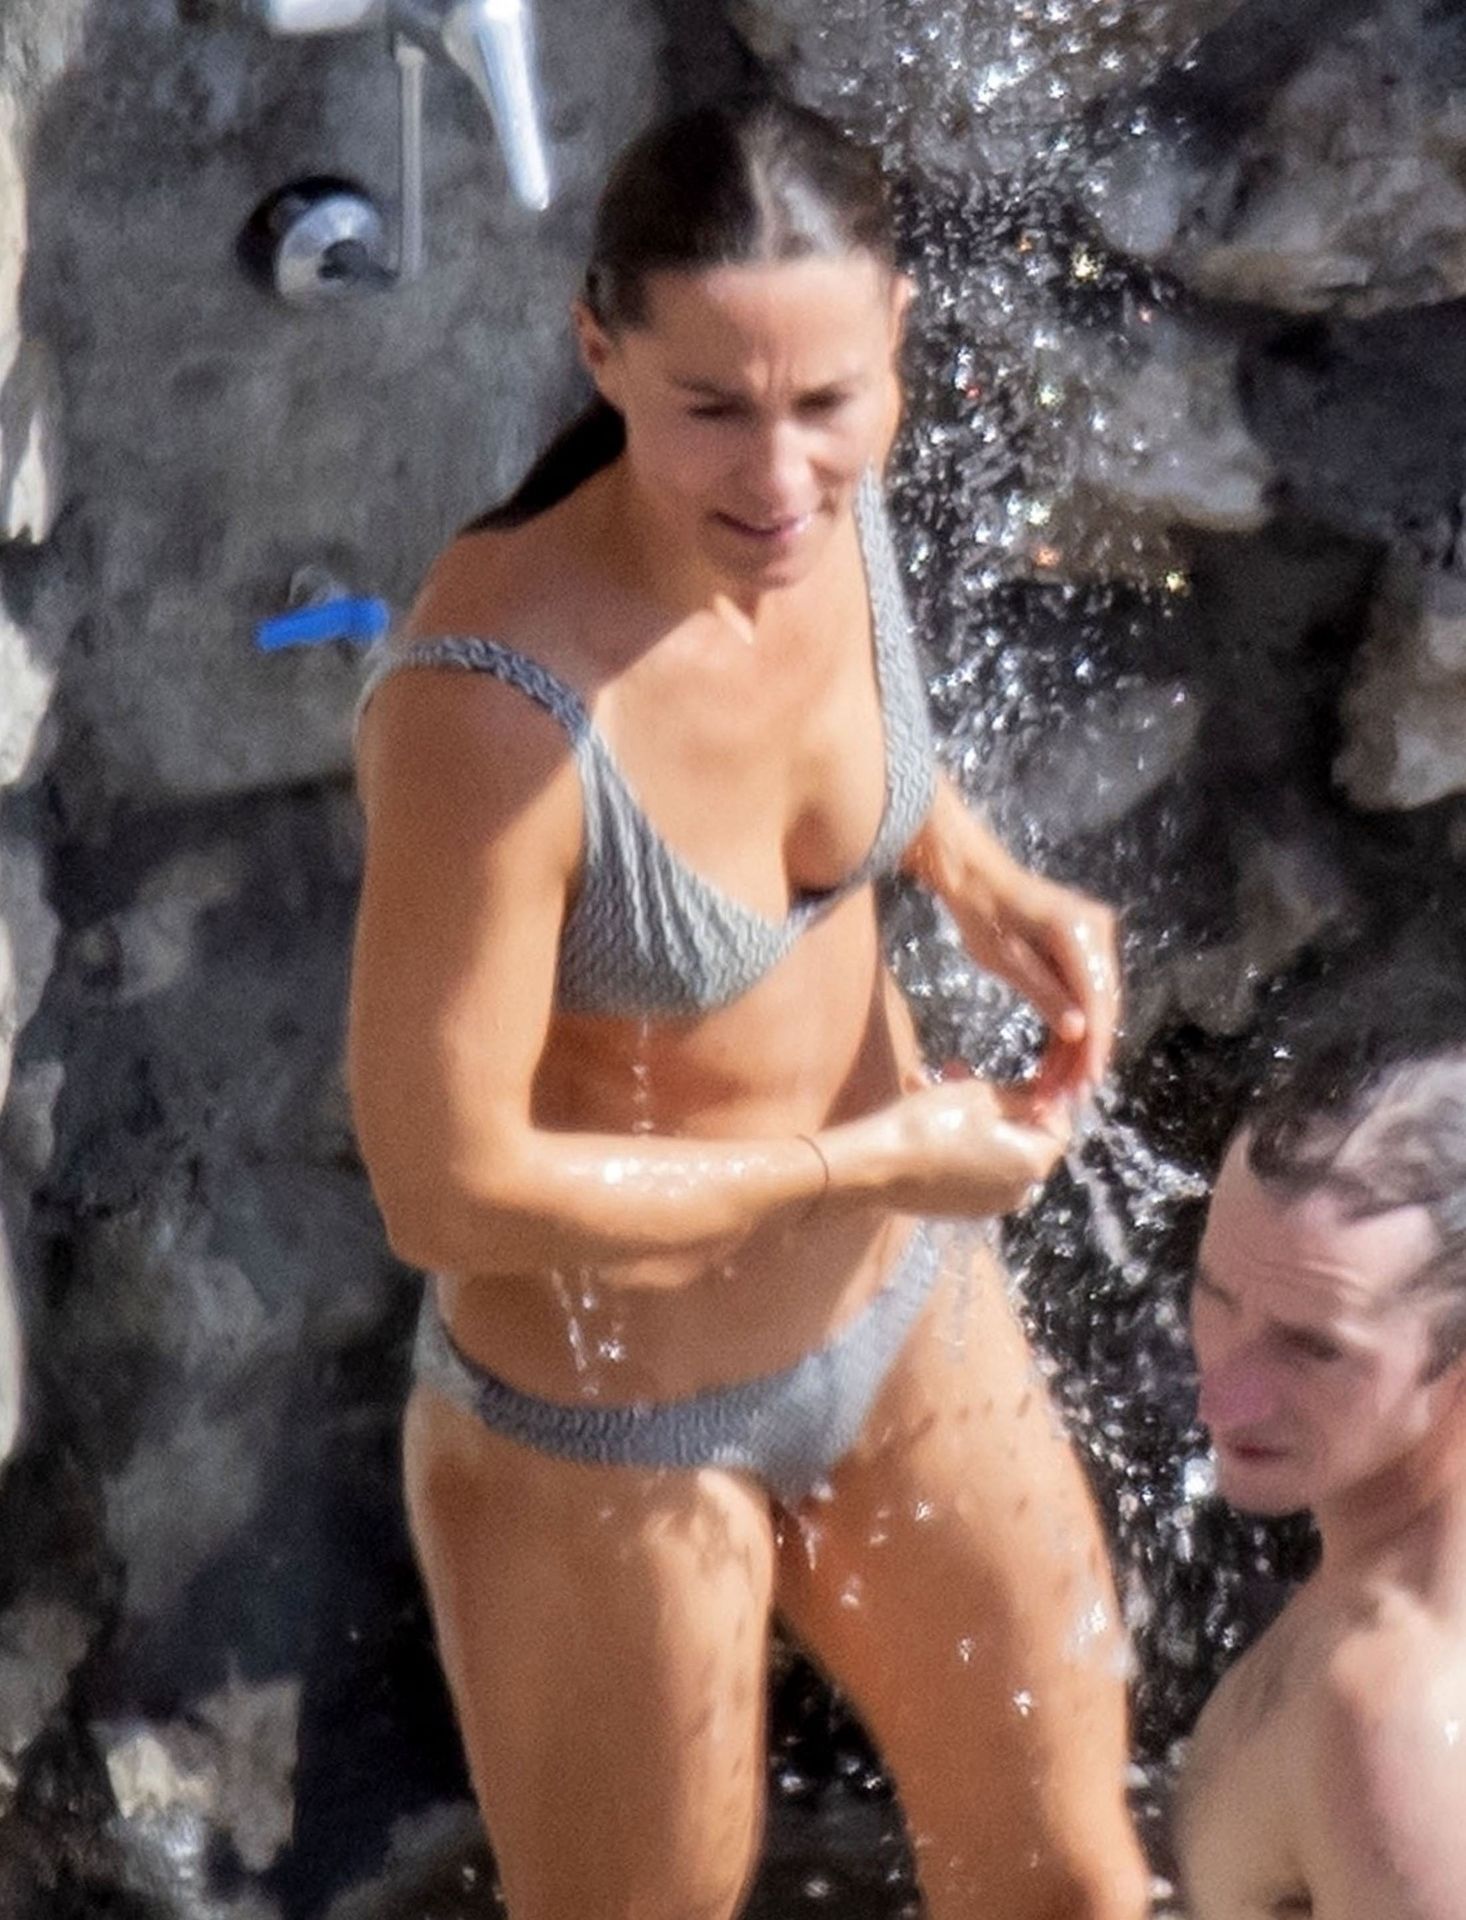 charles bitton share pippa middleton nude pic photos